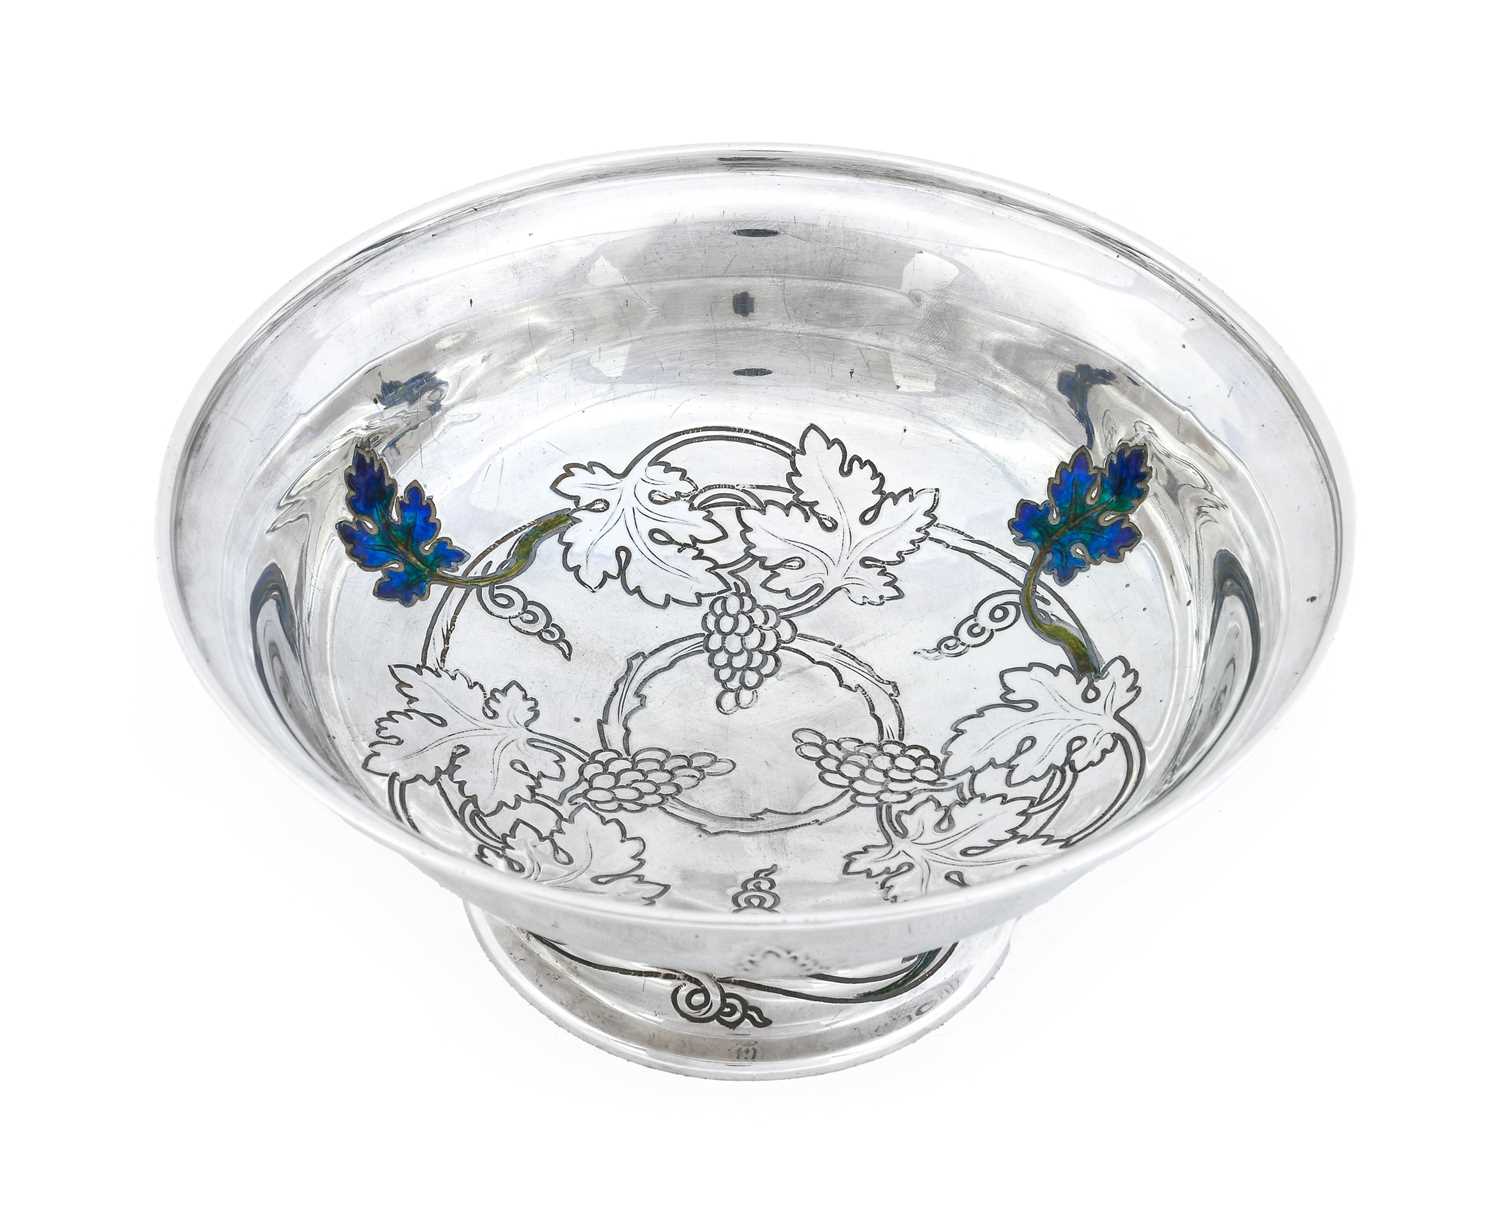 A Liberty & Co. Silver and Enamel Pedestal Bowl, cast with grape vines picked out in green and - Image 3 of 3